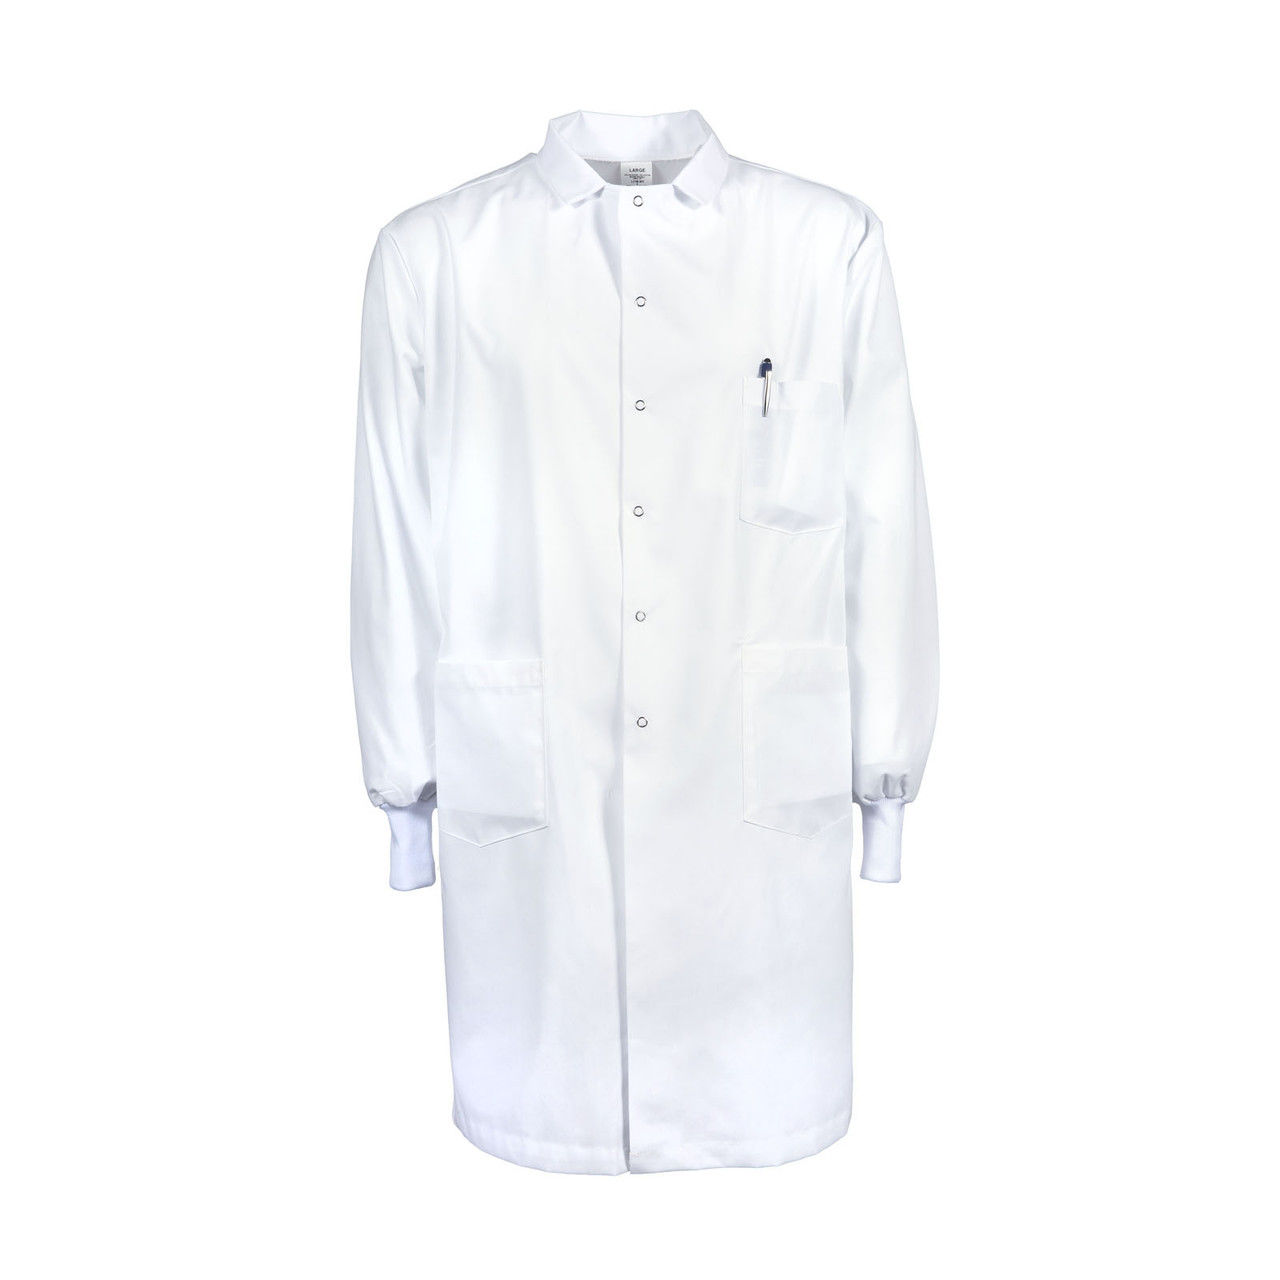 What size range does the snap lab offer for the Knit Cuff Lab coat?